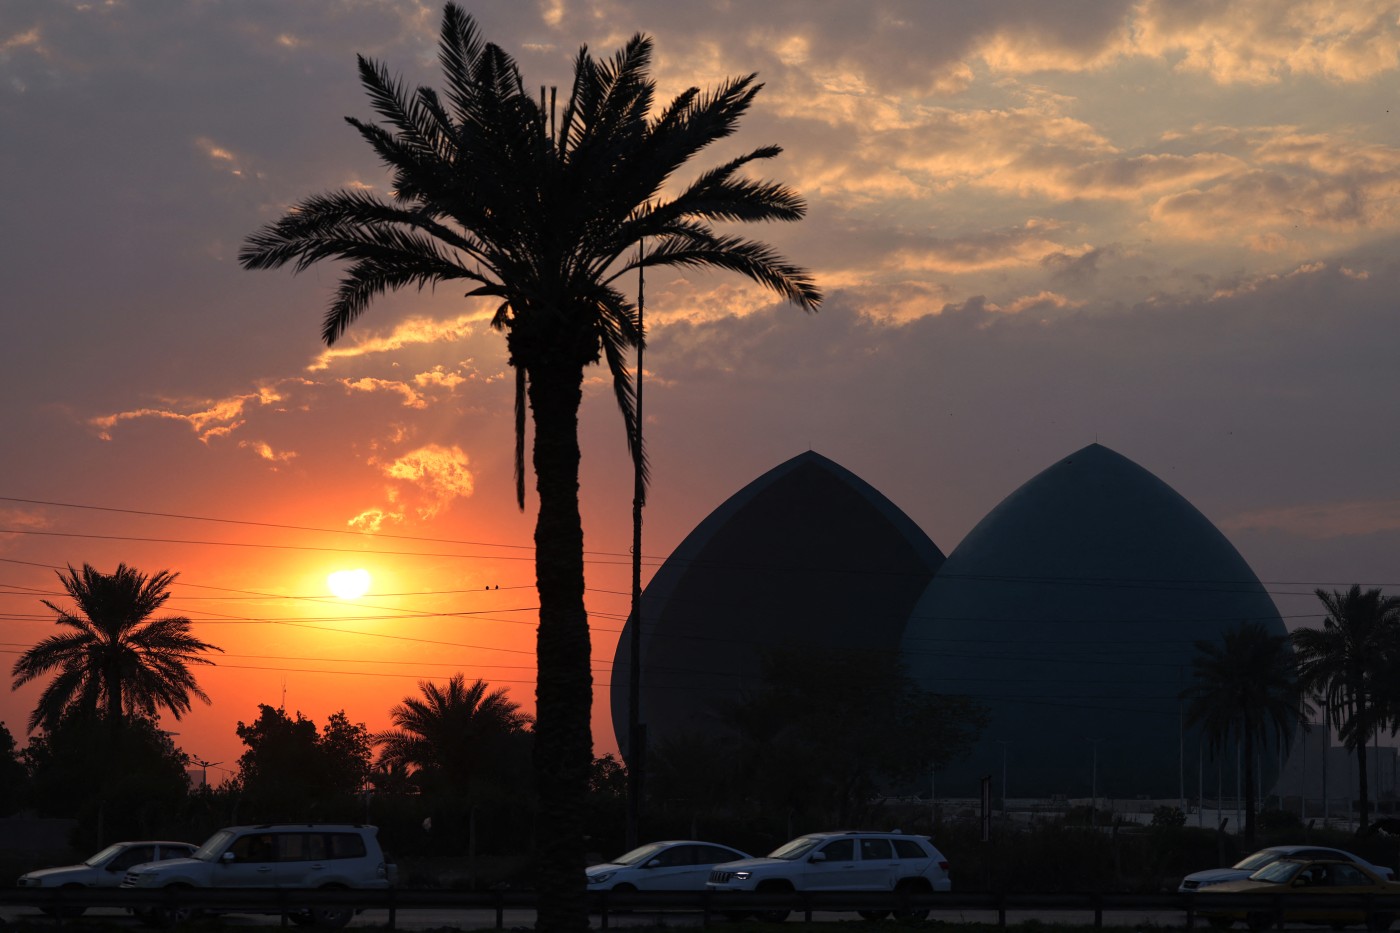 Image of Al-Shaheed monument in Baghdad during sunset